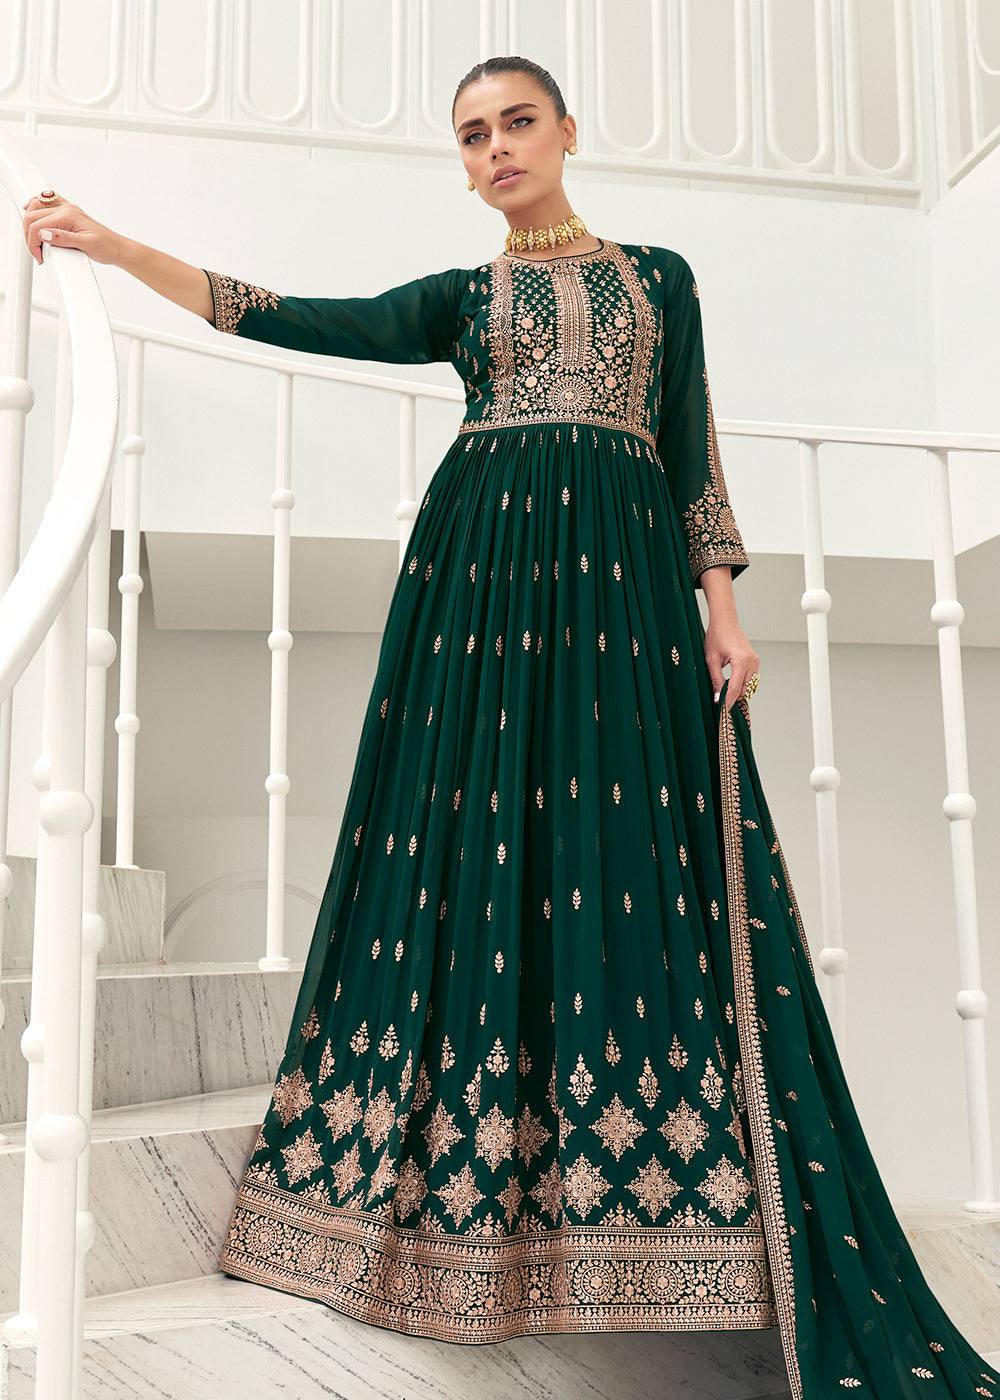 Buy Now Dark Green Real Georgette Party Style Anarkali Suit Online in USA, UK, Australia, New Zealand, Canada & Worldwide at Empress Clothing.